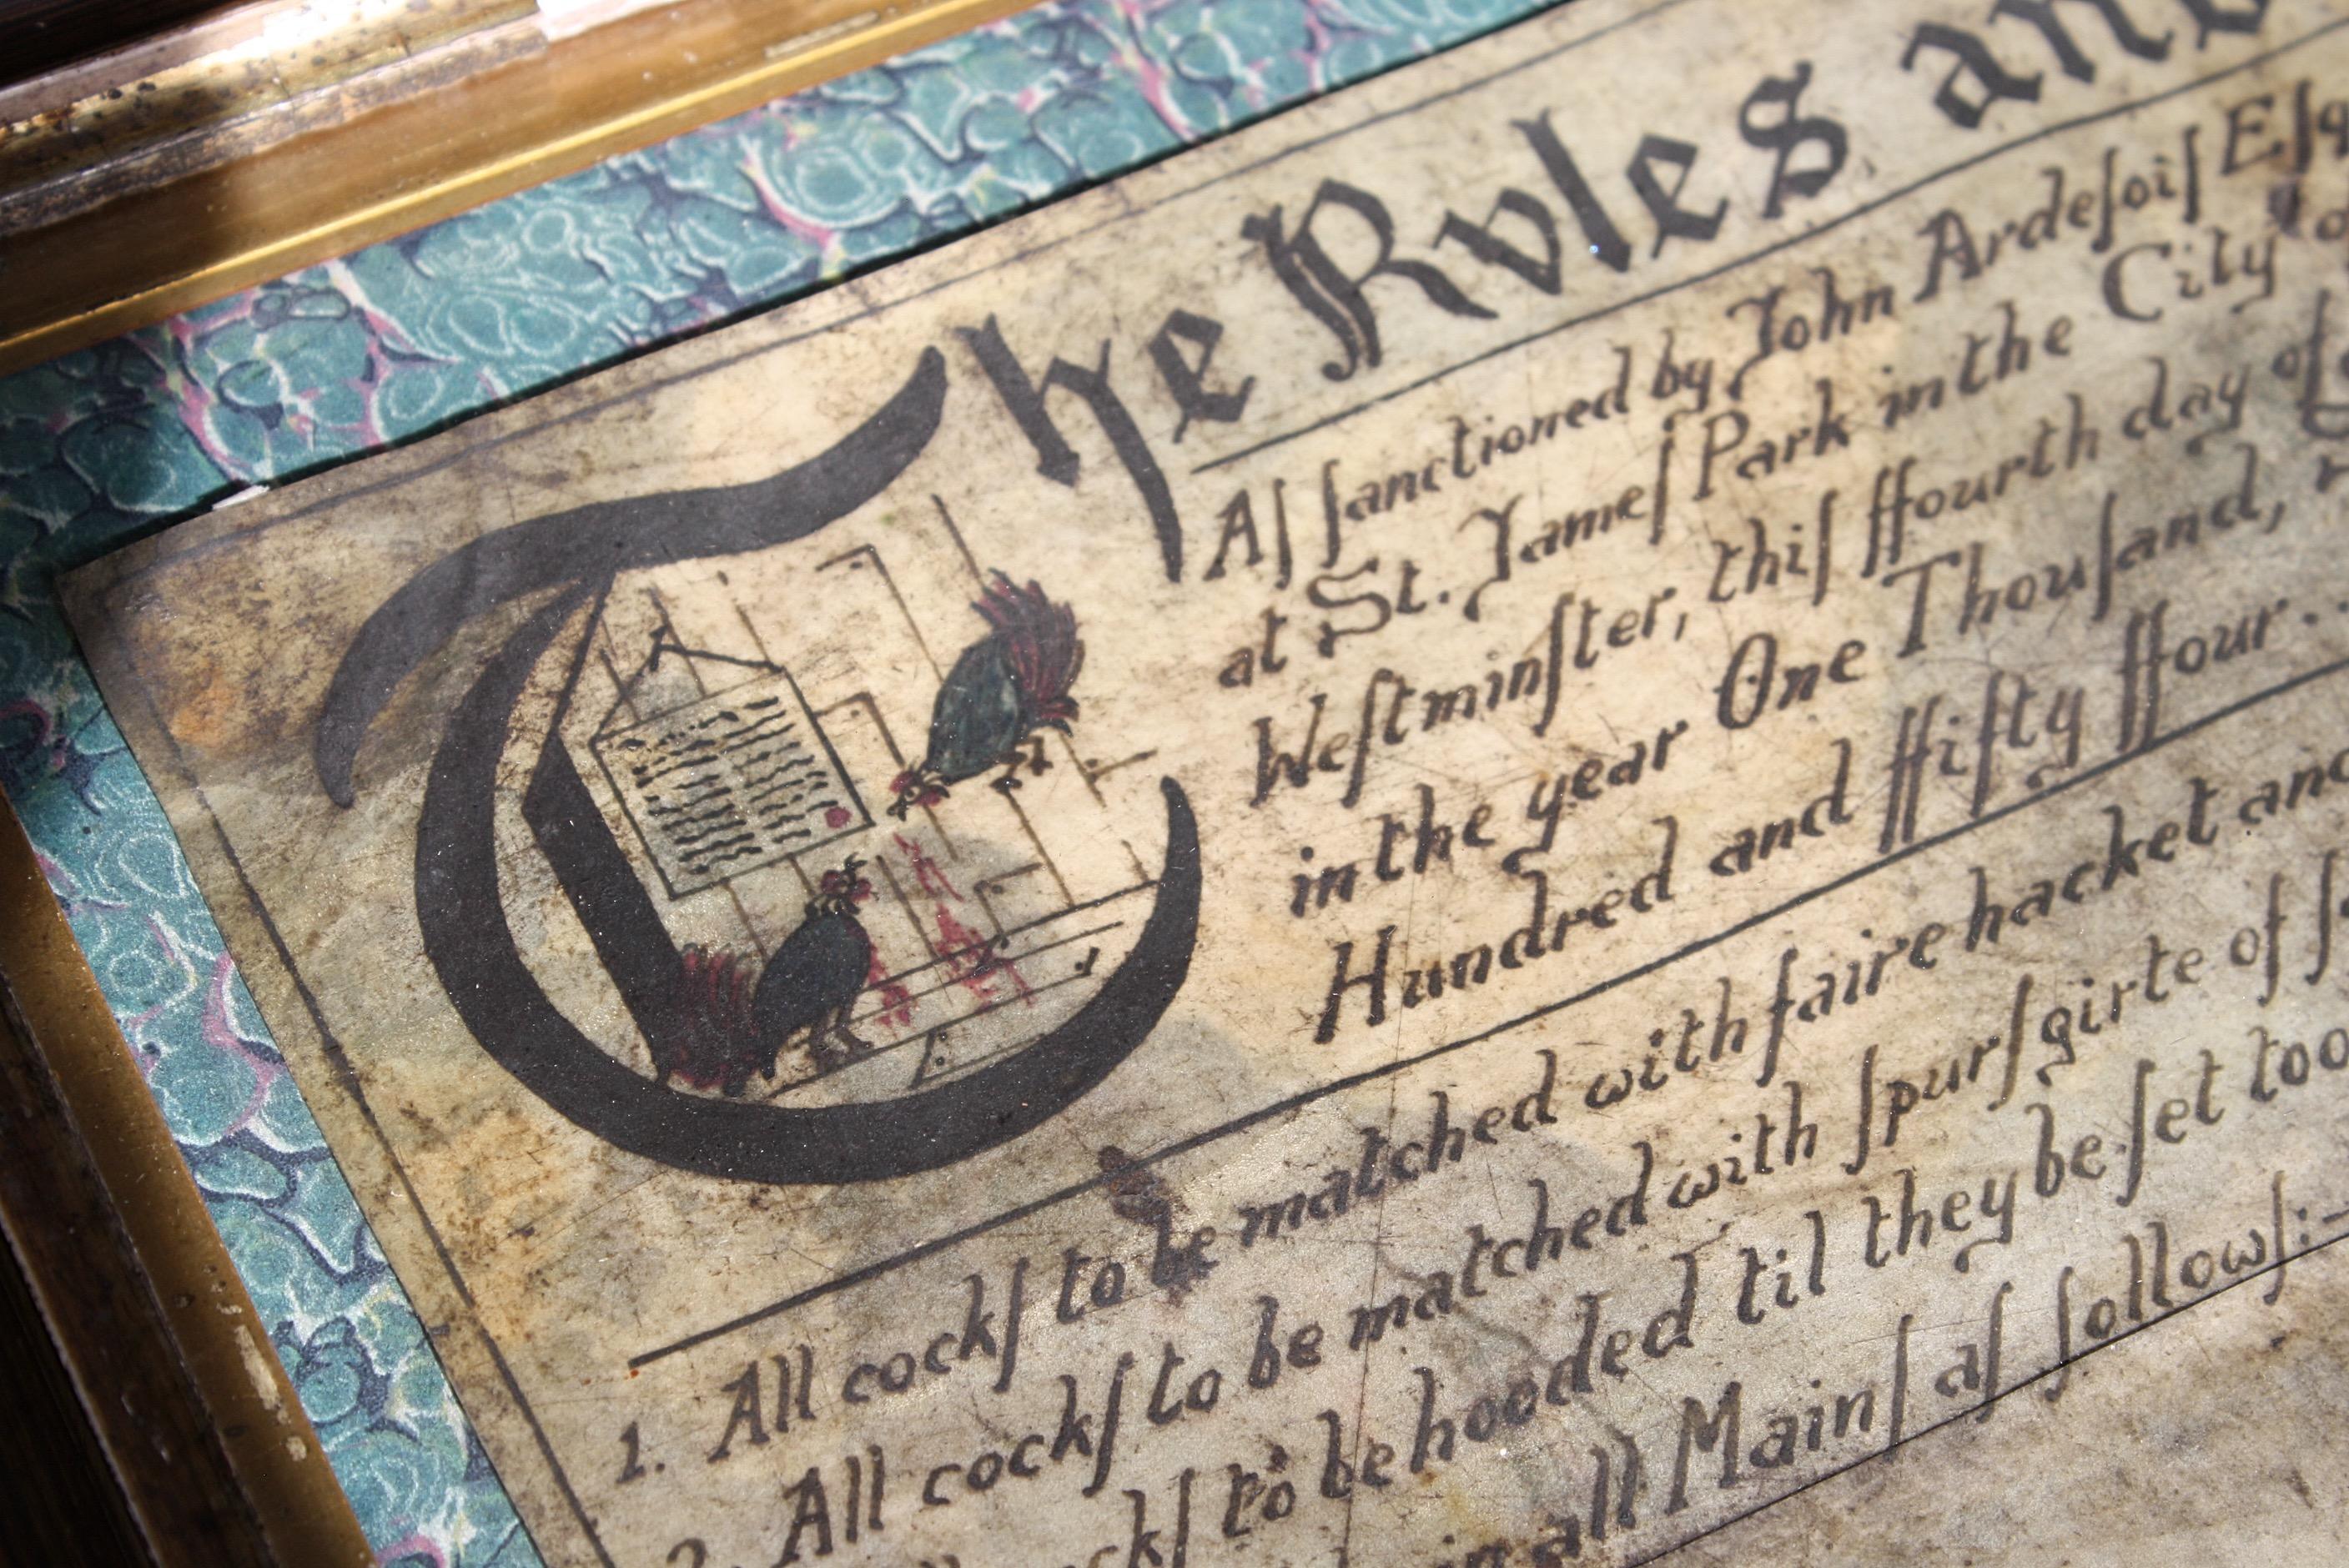 The Rules & Order of Cockfighting On Parchment With Seal Dated 1757 Curio  In Good Condition For Sale In Lowestoft, GB